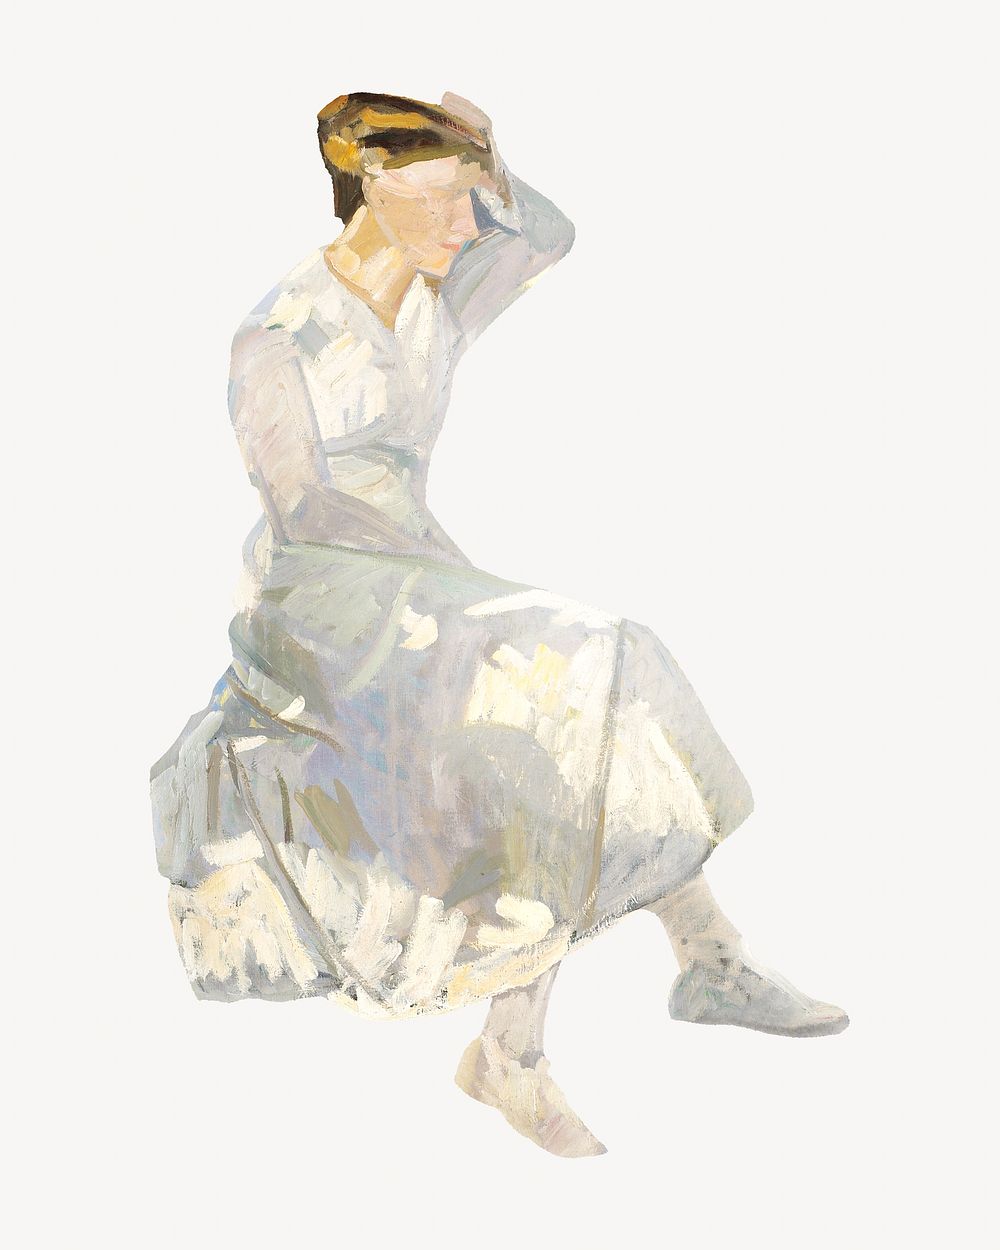 Victorian woman, vintage illustration by Edvard Weie. Remixed by rawpixel.